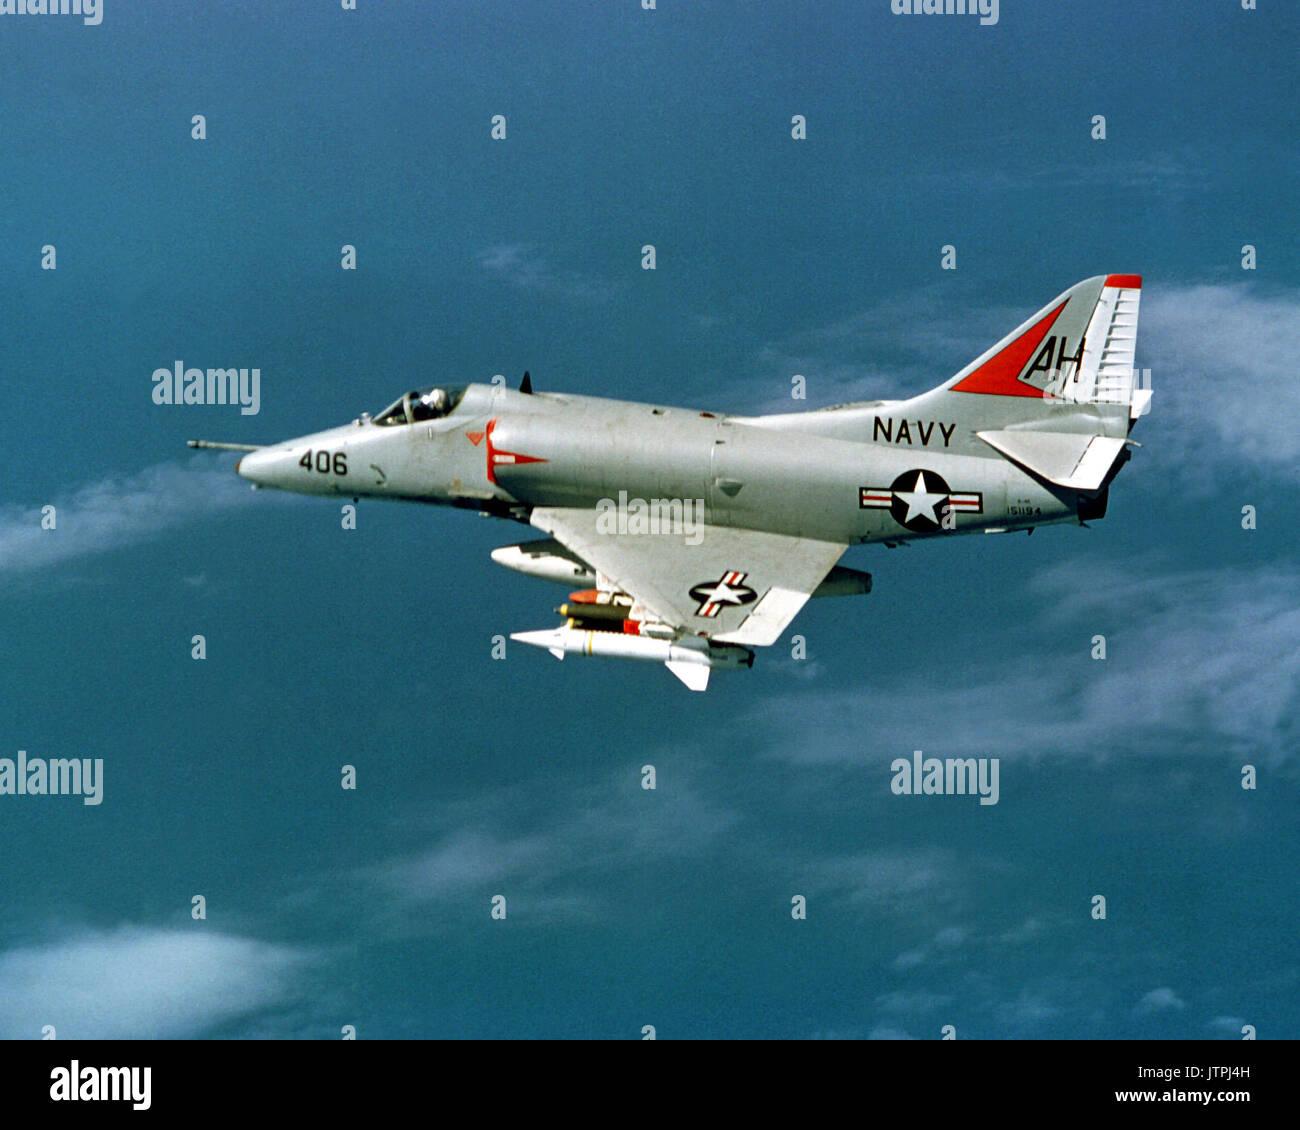 An air-to-air left side view of an Attack Squadron 164 (VA-164) A-4 Skyhawk aircraft en route to a target in North Vietnam.  The aircraft is piloted by Cmdr. William F. Span, executive officer of VA-164. Stock Photo